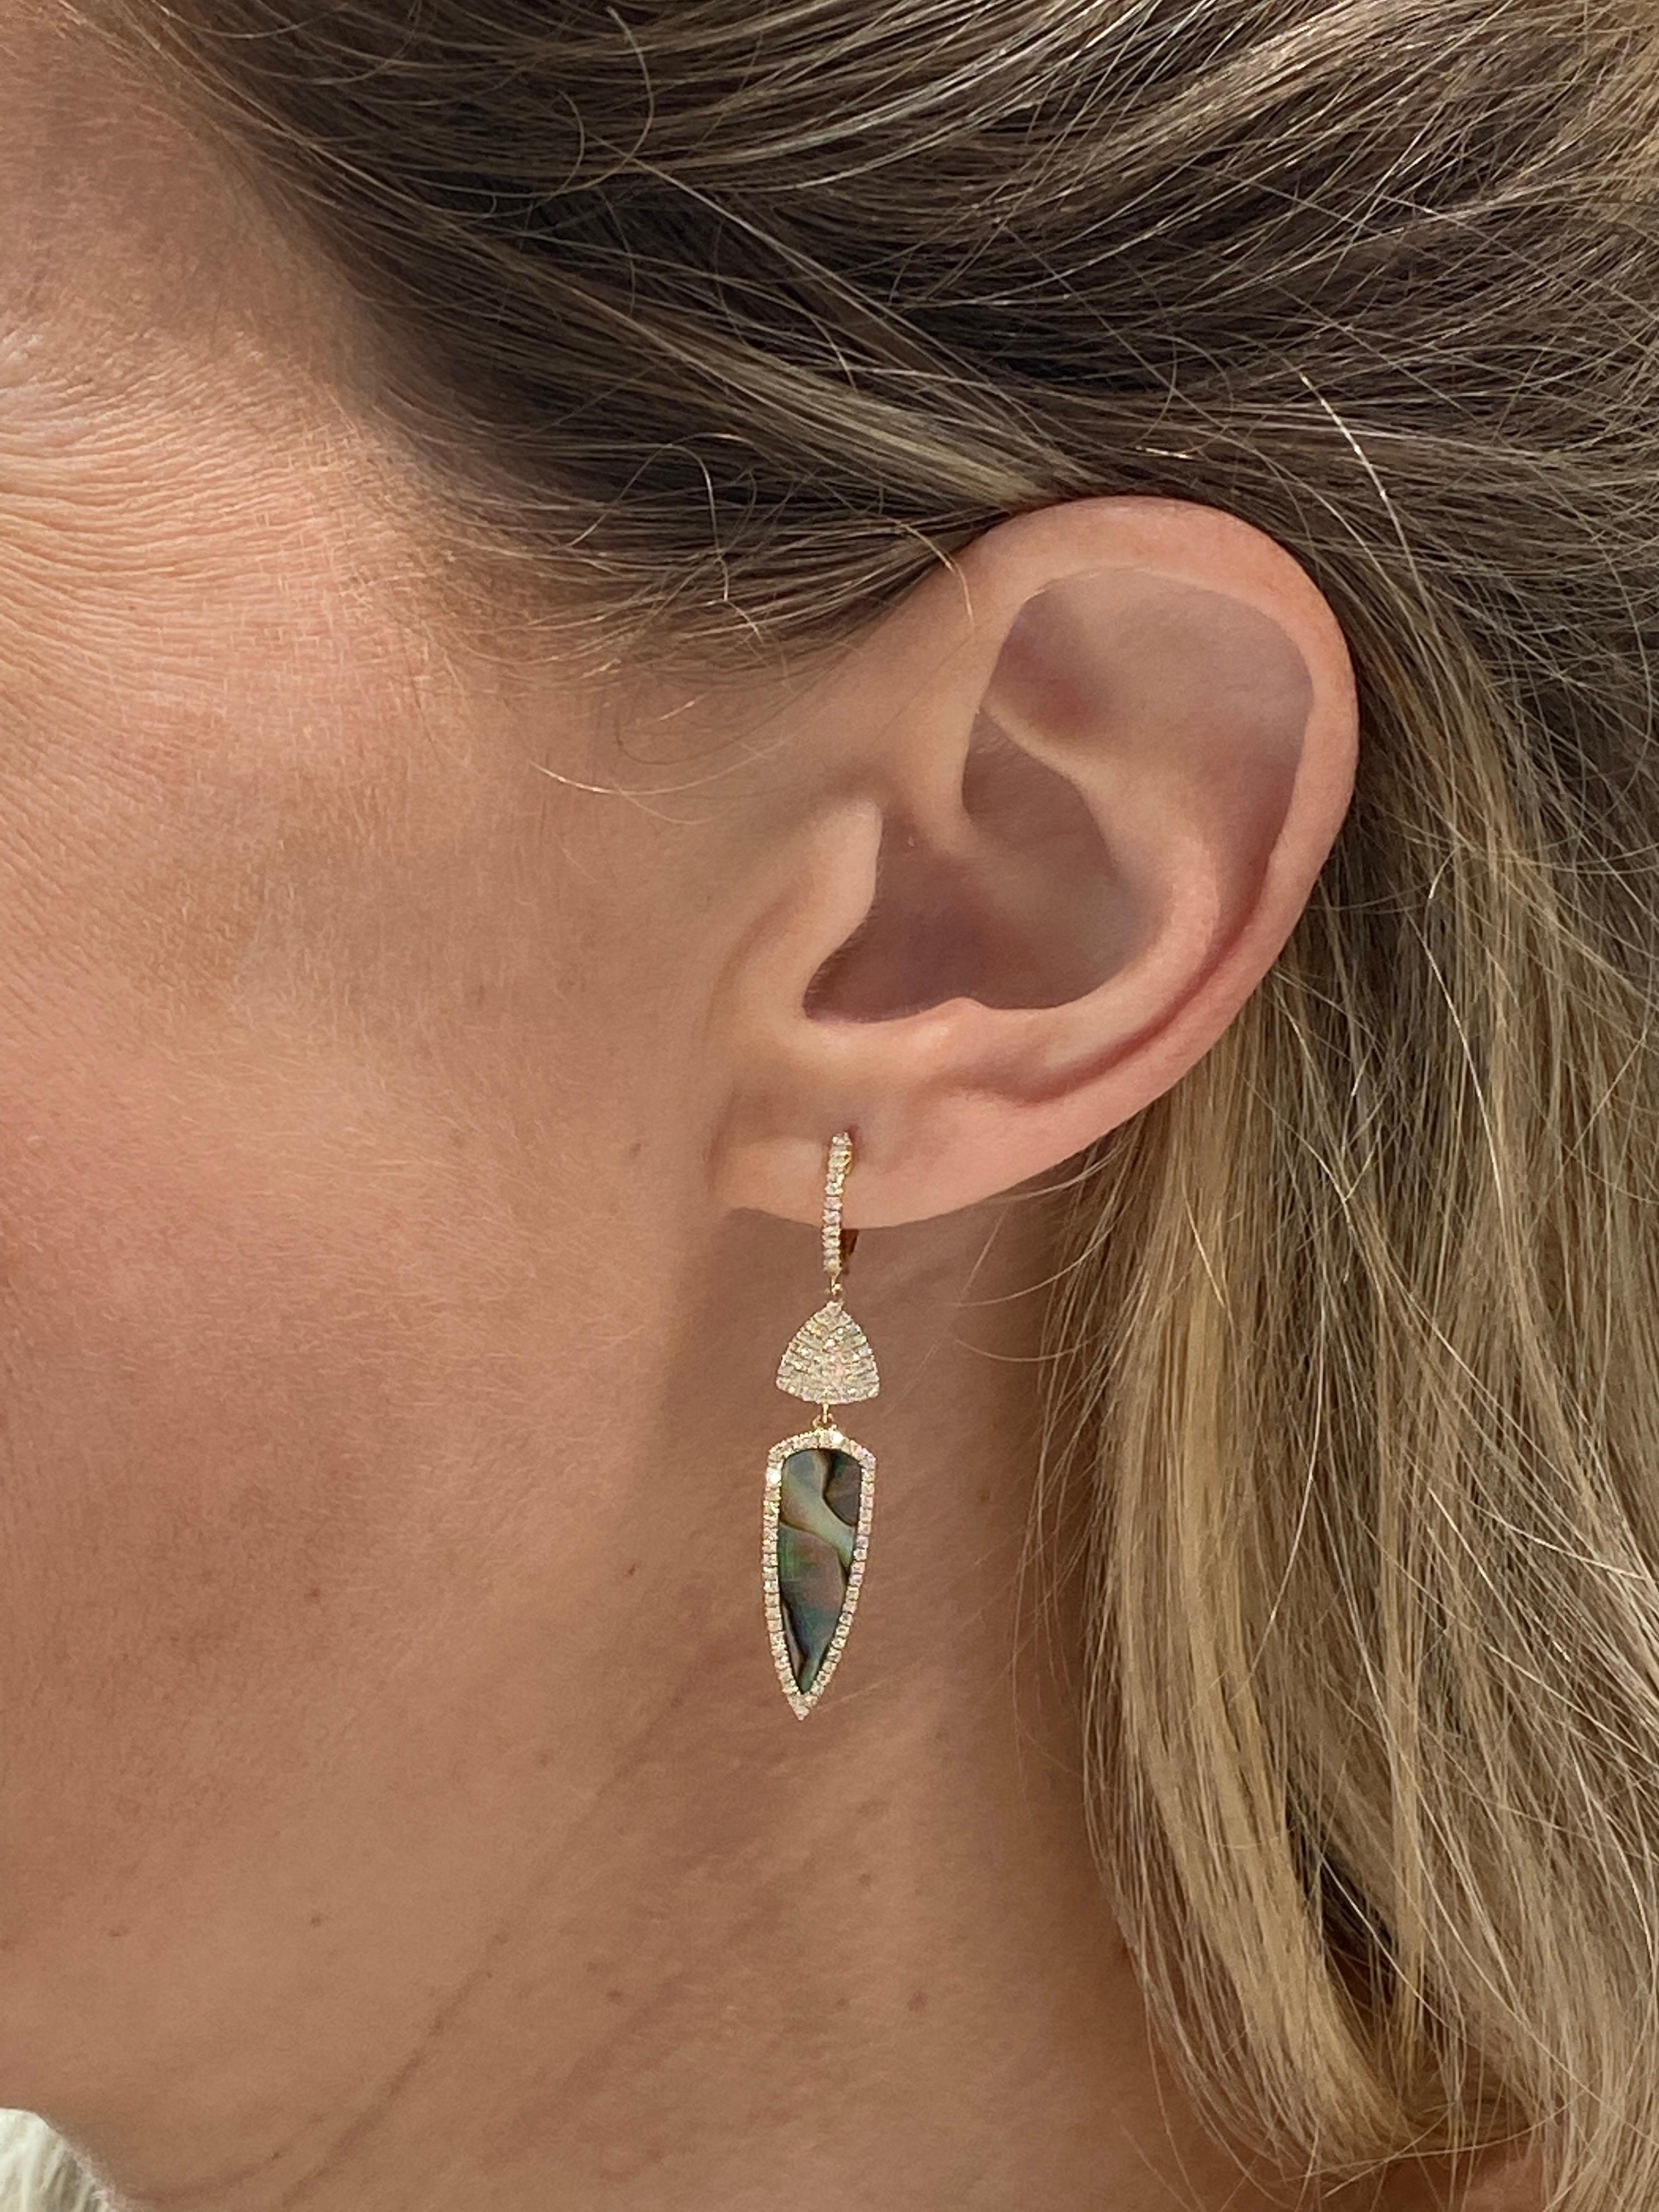 These unique earrings feature an arrow shaped abalone shell that dangles from a huggie hoop earring accented with 0.46 carat total weight in natural, round diamonds. 
Measurements:  Huggie Height: 11mm / Pave Triange Height: 7.5mm / Halo Triangle